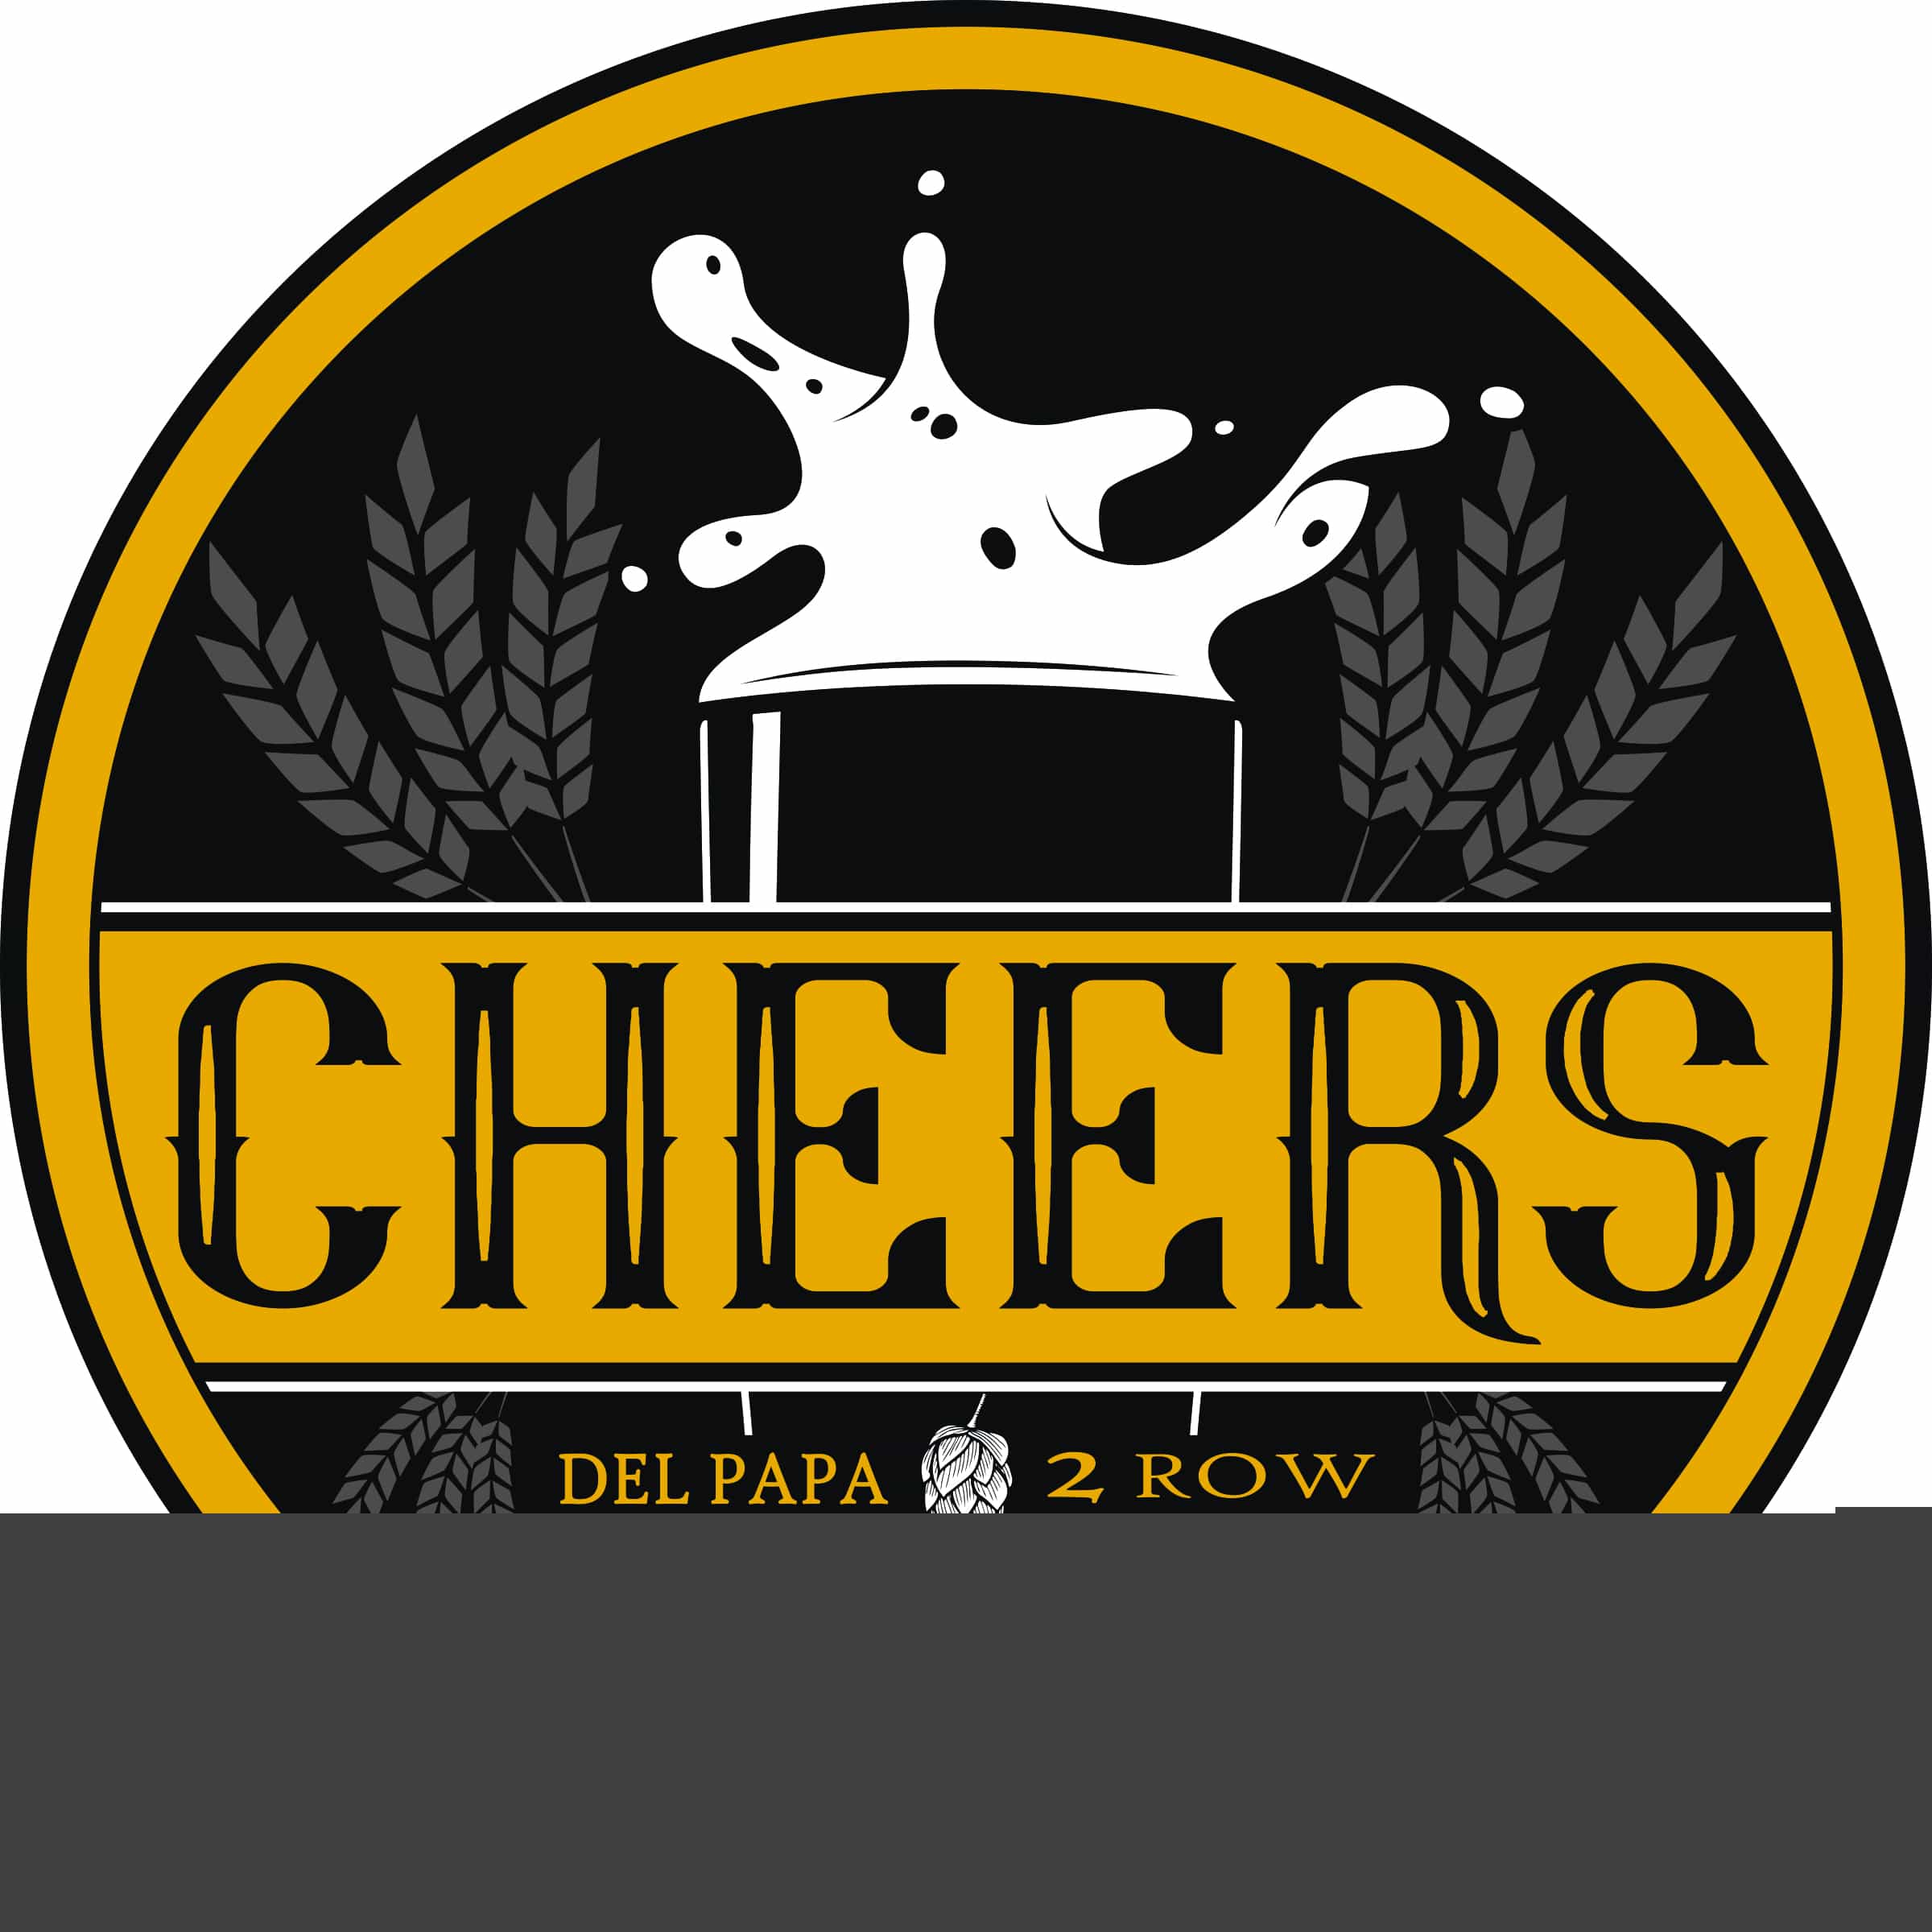 You are currently viewing Del Papa Distributing Announces New “Cheers” Events